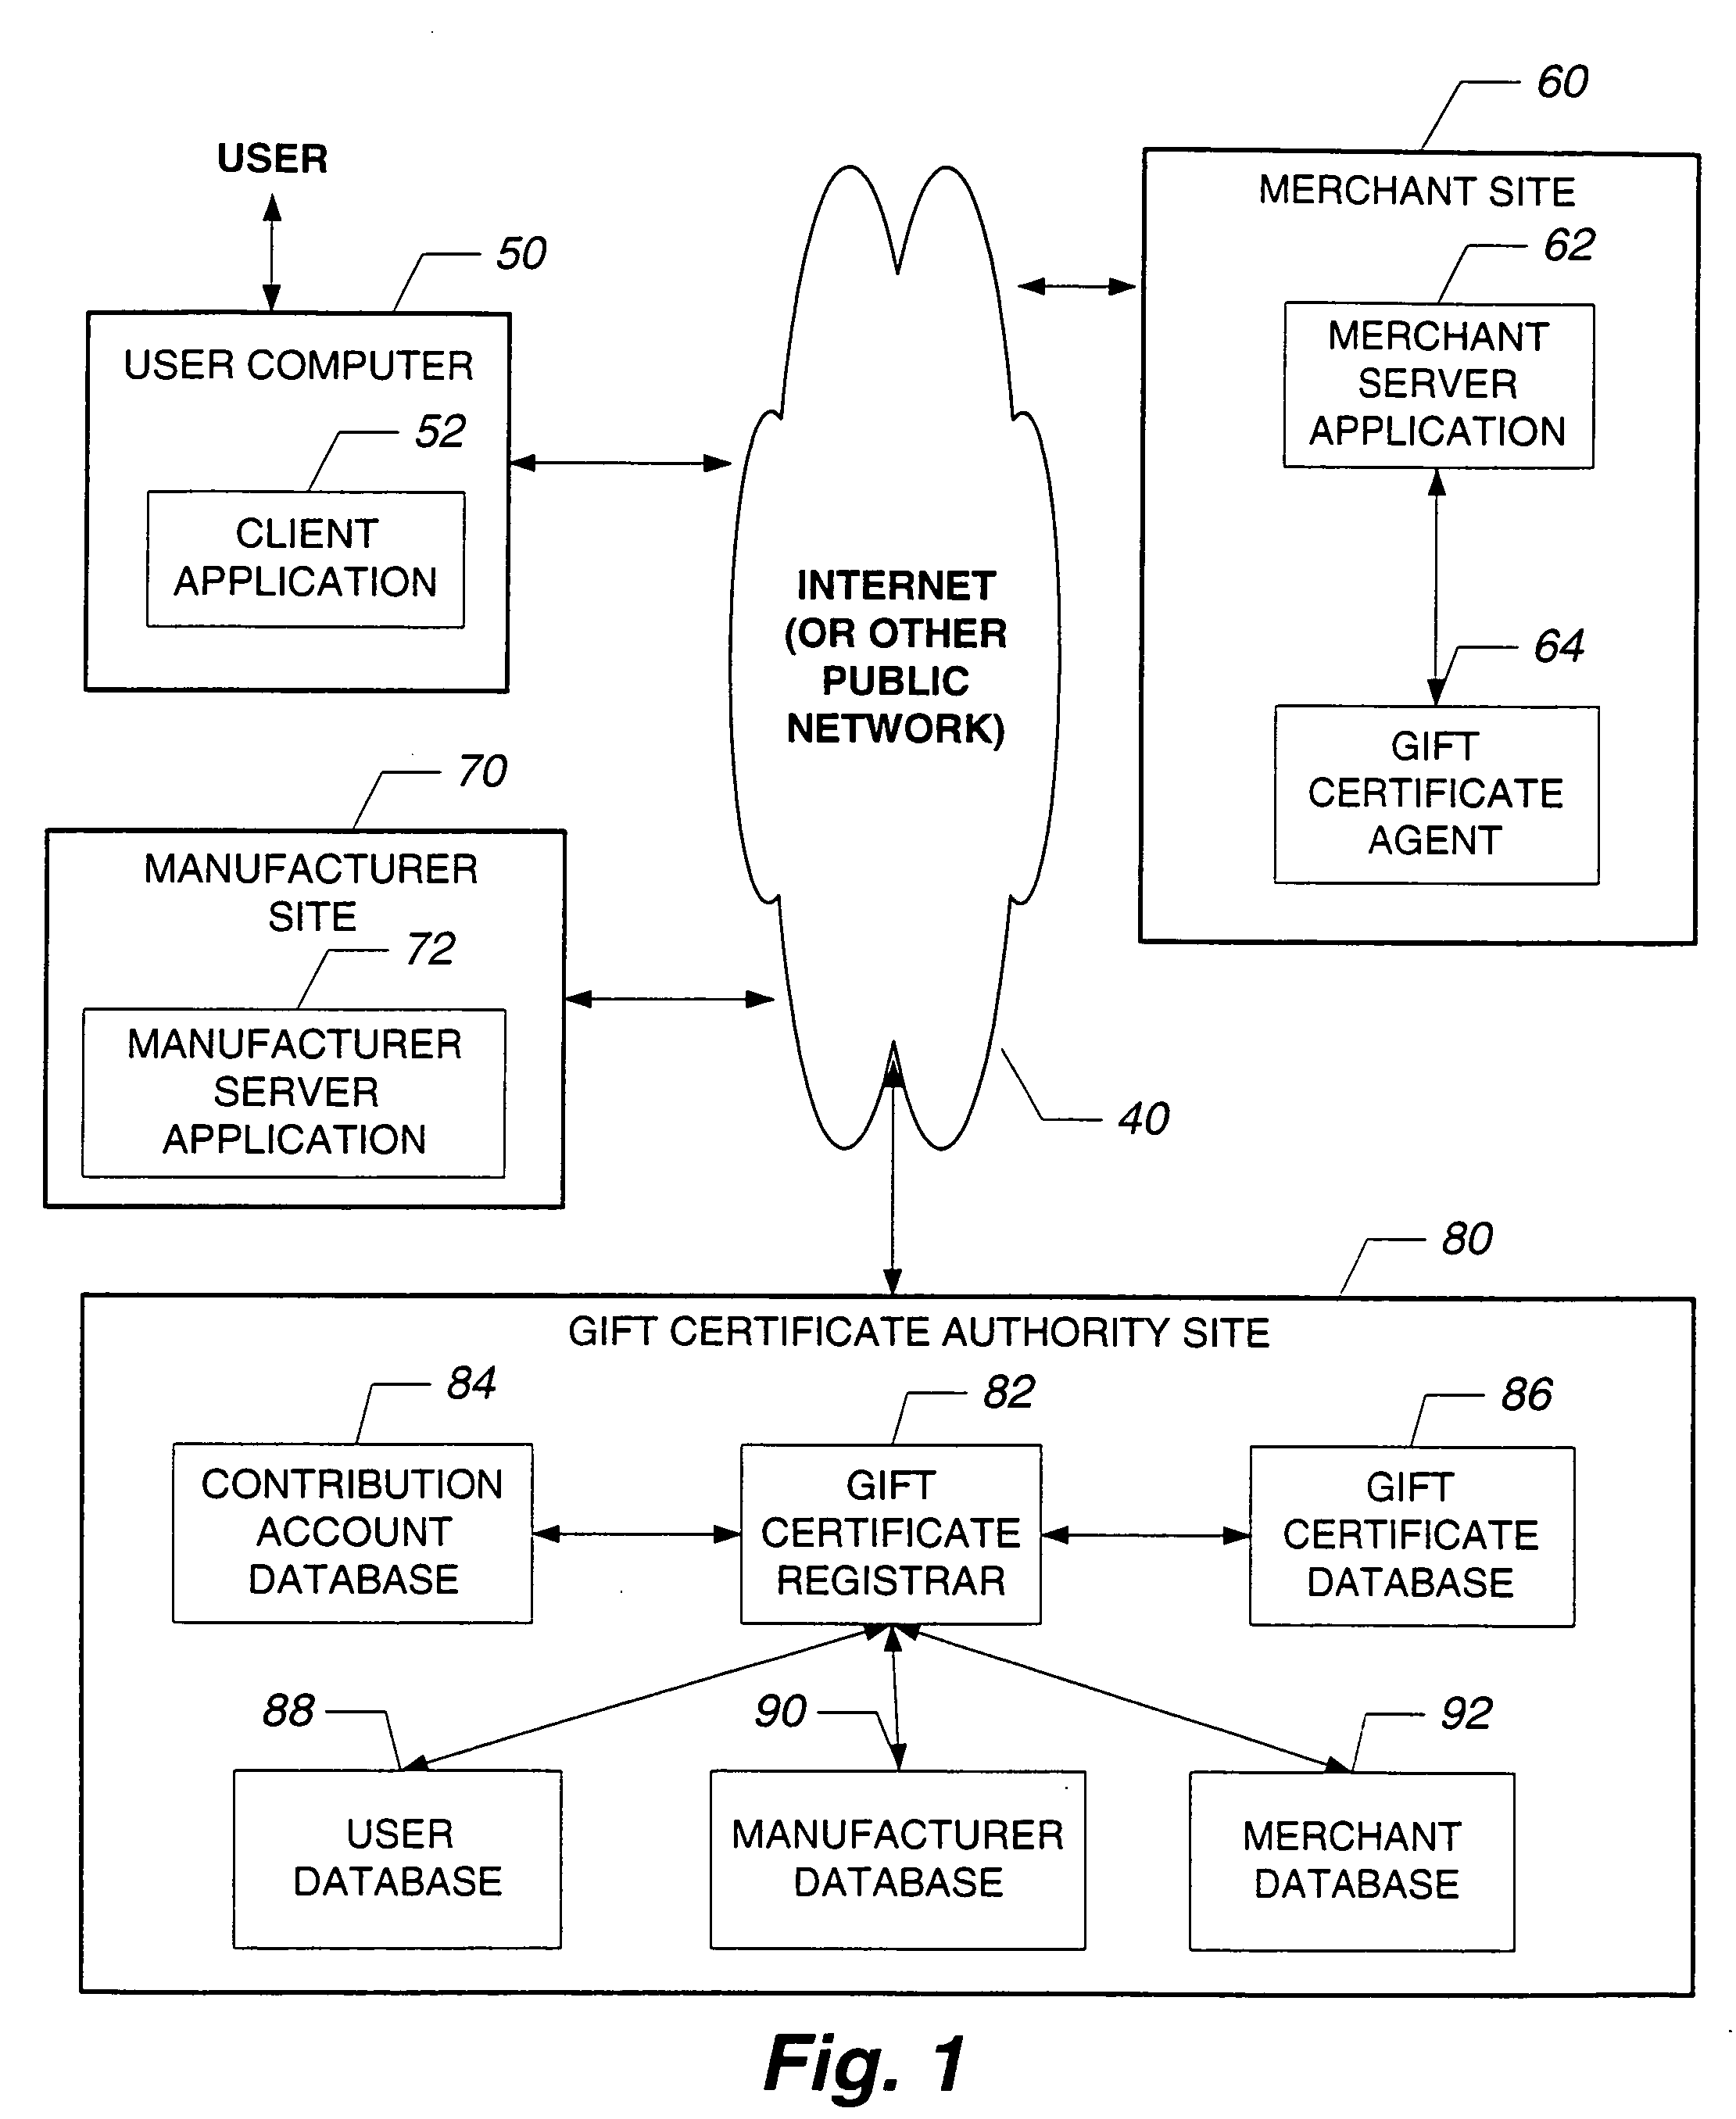 System and method for providing electronic multi-merchant gift certificate & contribution brokering services over a distributed network